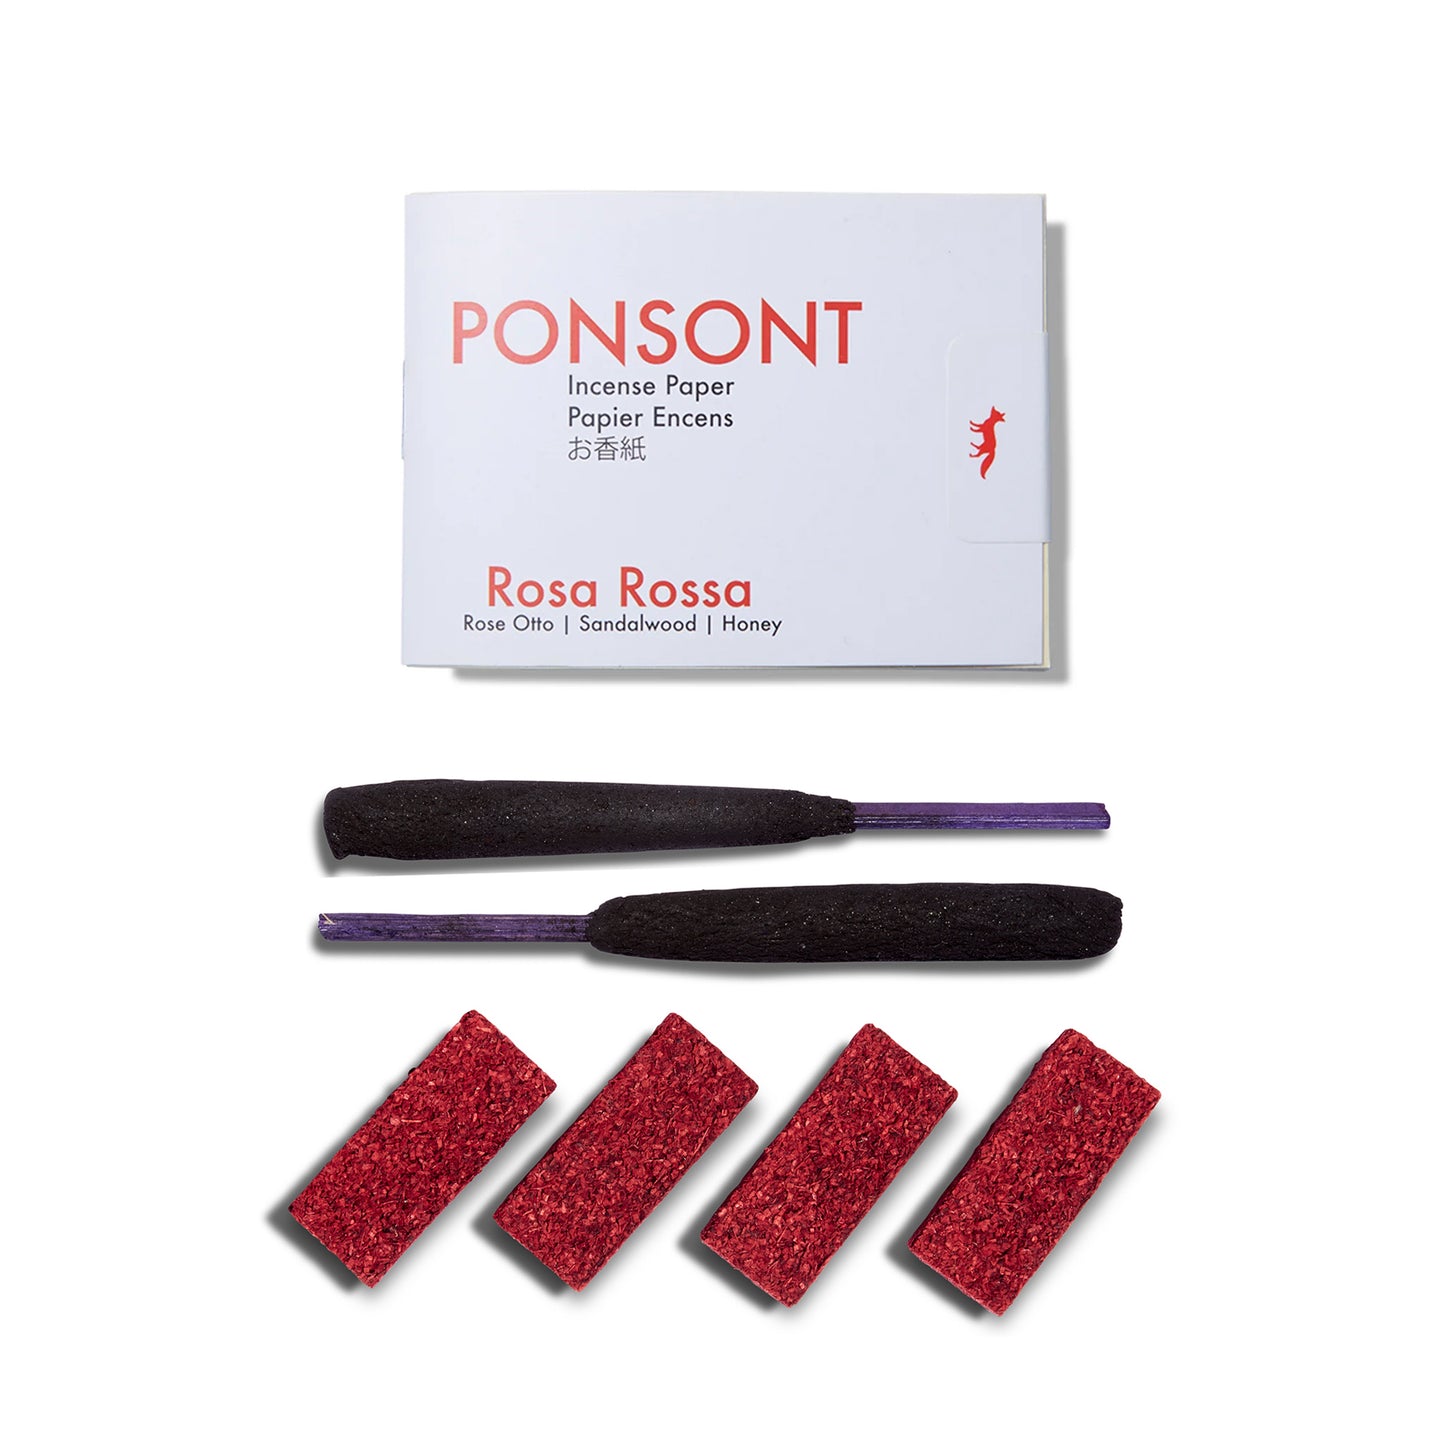 Three brands of incense. A packet of the Ponsont Rossa Rosa Incense Papers, two Zen Bunni Holy Smoke incense sticks and four deep pink bricks of the Diffusion Rosicrucienne Dat Rosa Del Apibus incense bricks.